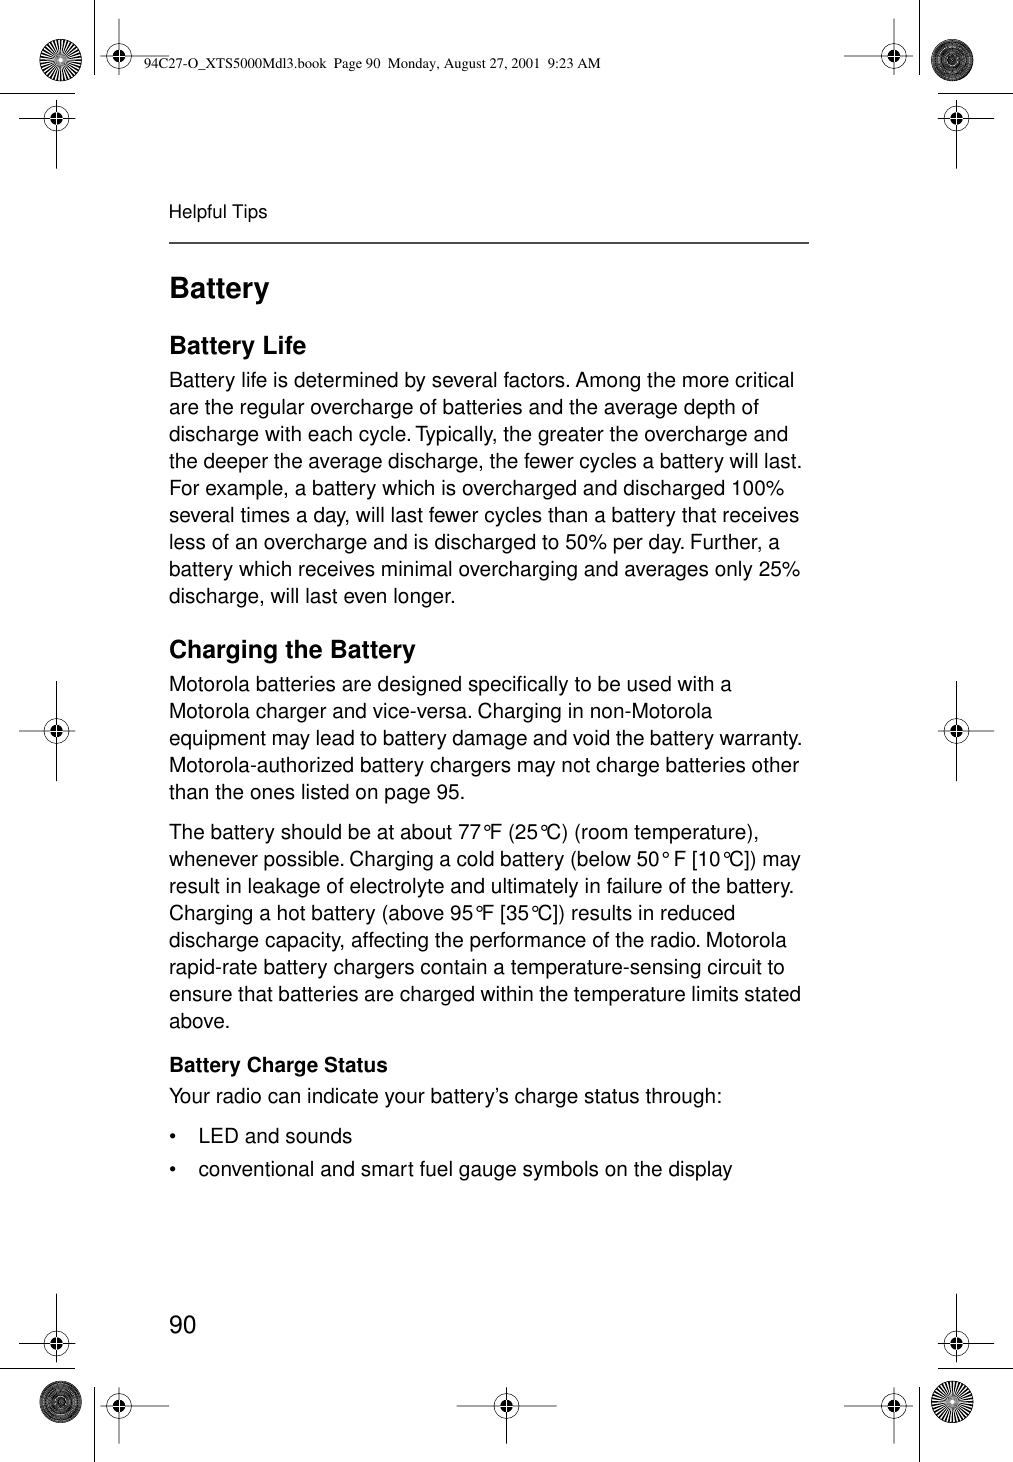 90Helpful TipsBatteryBattery LifeBattery life is determined by several factors. Among the more critical are the regular overcharge of batteries and the average depth of discharge with each cycle. Typically, the greater the overcharge and the deeper the average discharge, the fewer cycles a battery will last. For example, a battery which is overcharged and discharged 100% several times a day, will last fewer cycles than a battery that receives less of an overcharge and is discharged to 50% per day. Further, a battery which receives minimal overcharging and averages only 25% discharge, will last even longer.Charging the BatteryMotorola batteries are designed speciﬁcally to be used with a Motorola charger and vice-versa. Charging in non-Motorola equipment may lead to battery damage and void the battery warranty. Motorola-authorized battery chargers may not charge batteries other than the ones listed on page 95.The battery should be at about 77°F (25°C) (room temperature), whenever possible. Charging a cold battery (below 50° F [10°C]) may result in leakage of electrolyte and ultimately in failure of the battery. Charging a hot battery (above 95°F [35°C]) results in reduced discharge capacity, affecting the performance of the radio. Motorola rapid-rate battery chargers contain a temperature-sensing circuit to ensure that batteries are charged within the temperature limits stated above.Battery Charge StatusYour radio can indicate your battery’s charge status through:• LED and sounds• conventional and smart fuel gauge symbols on the display94C27-O_XTS5000Mdl3.book  Page 90  Monday, August 27, 2001  9:23 AM